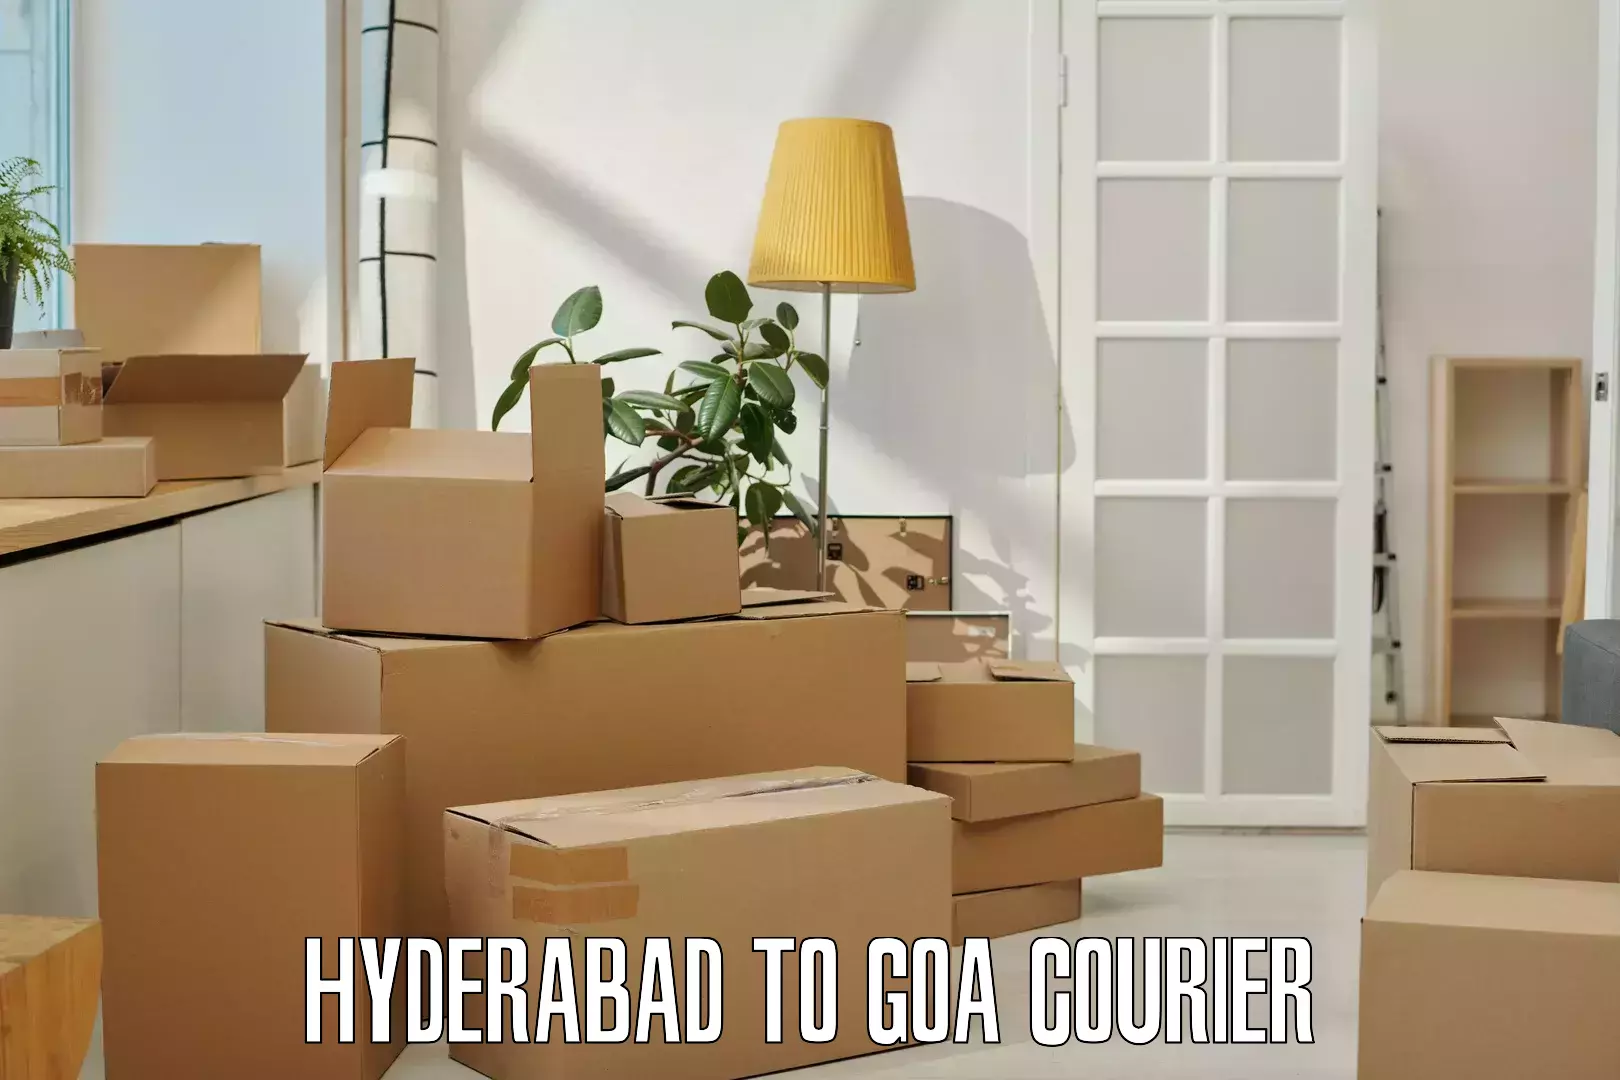 Package delivery network Hyderabad to Panaji